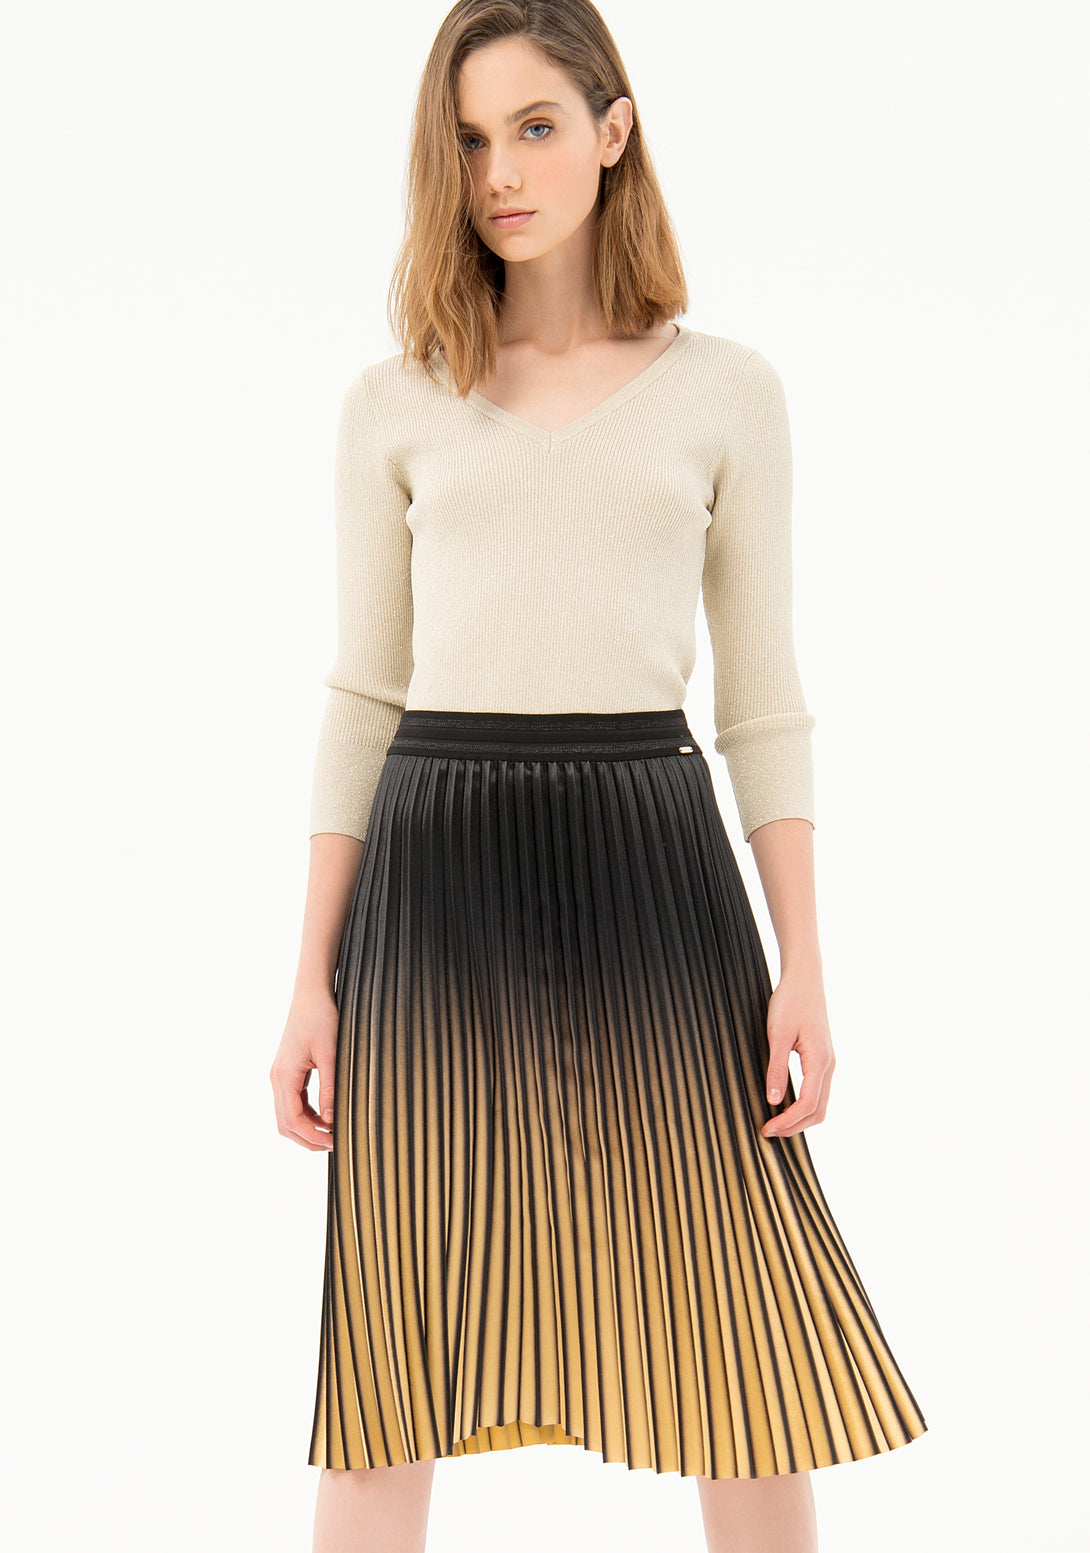 Skirt wide fit, middle length, with plissè effect